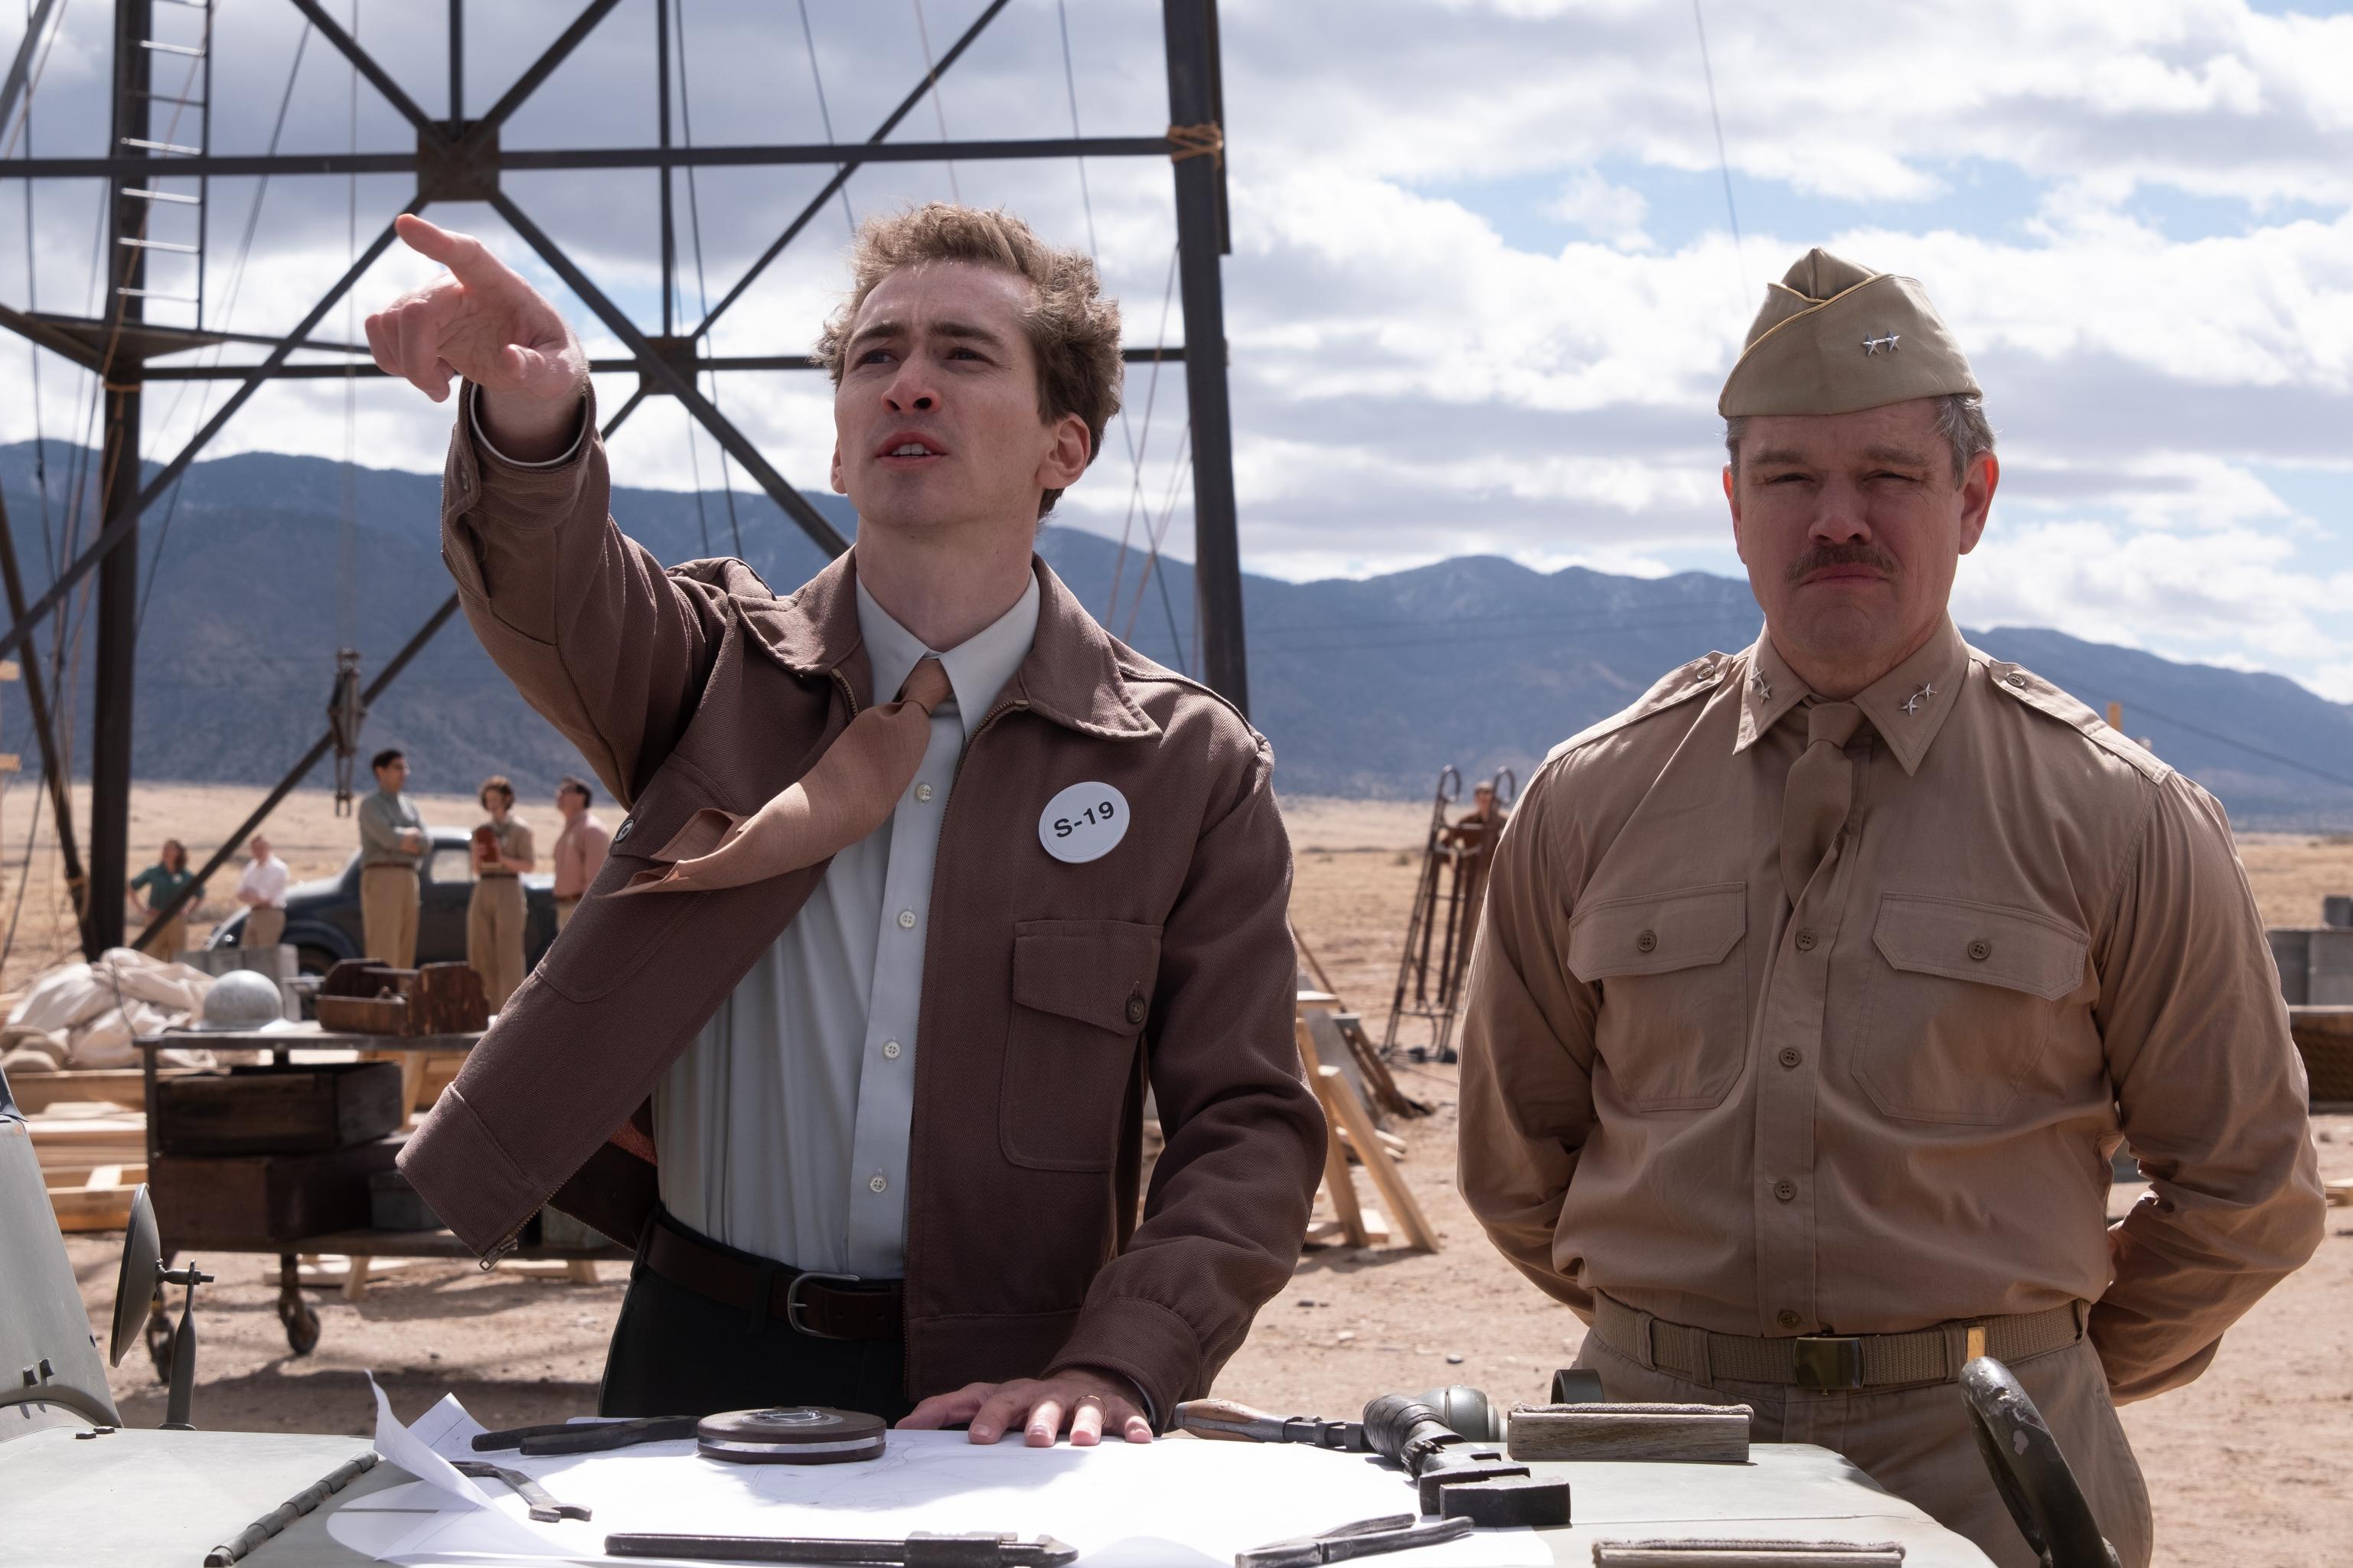 HD wallpaper featuring actors in character on the set of the movie Oppenheimer, with one gesturing upwards and the other standing beside him in a military uniform, set against a desert backdrop.